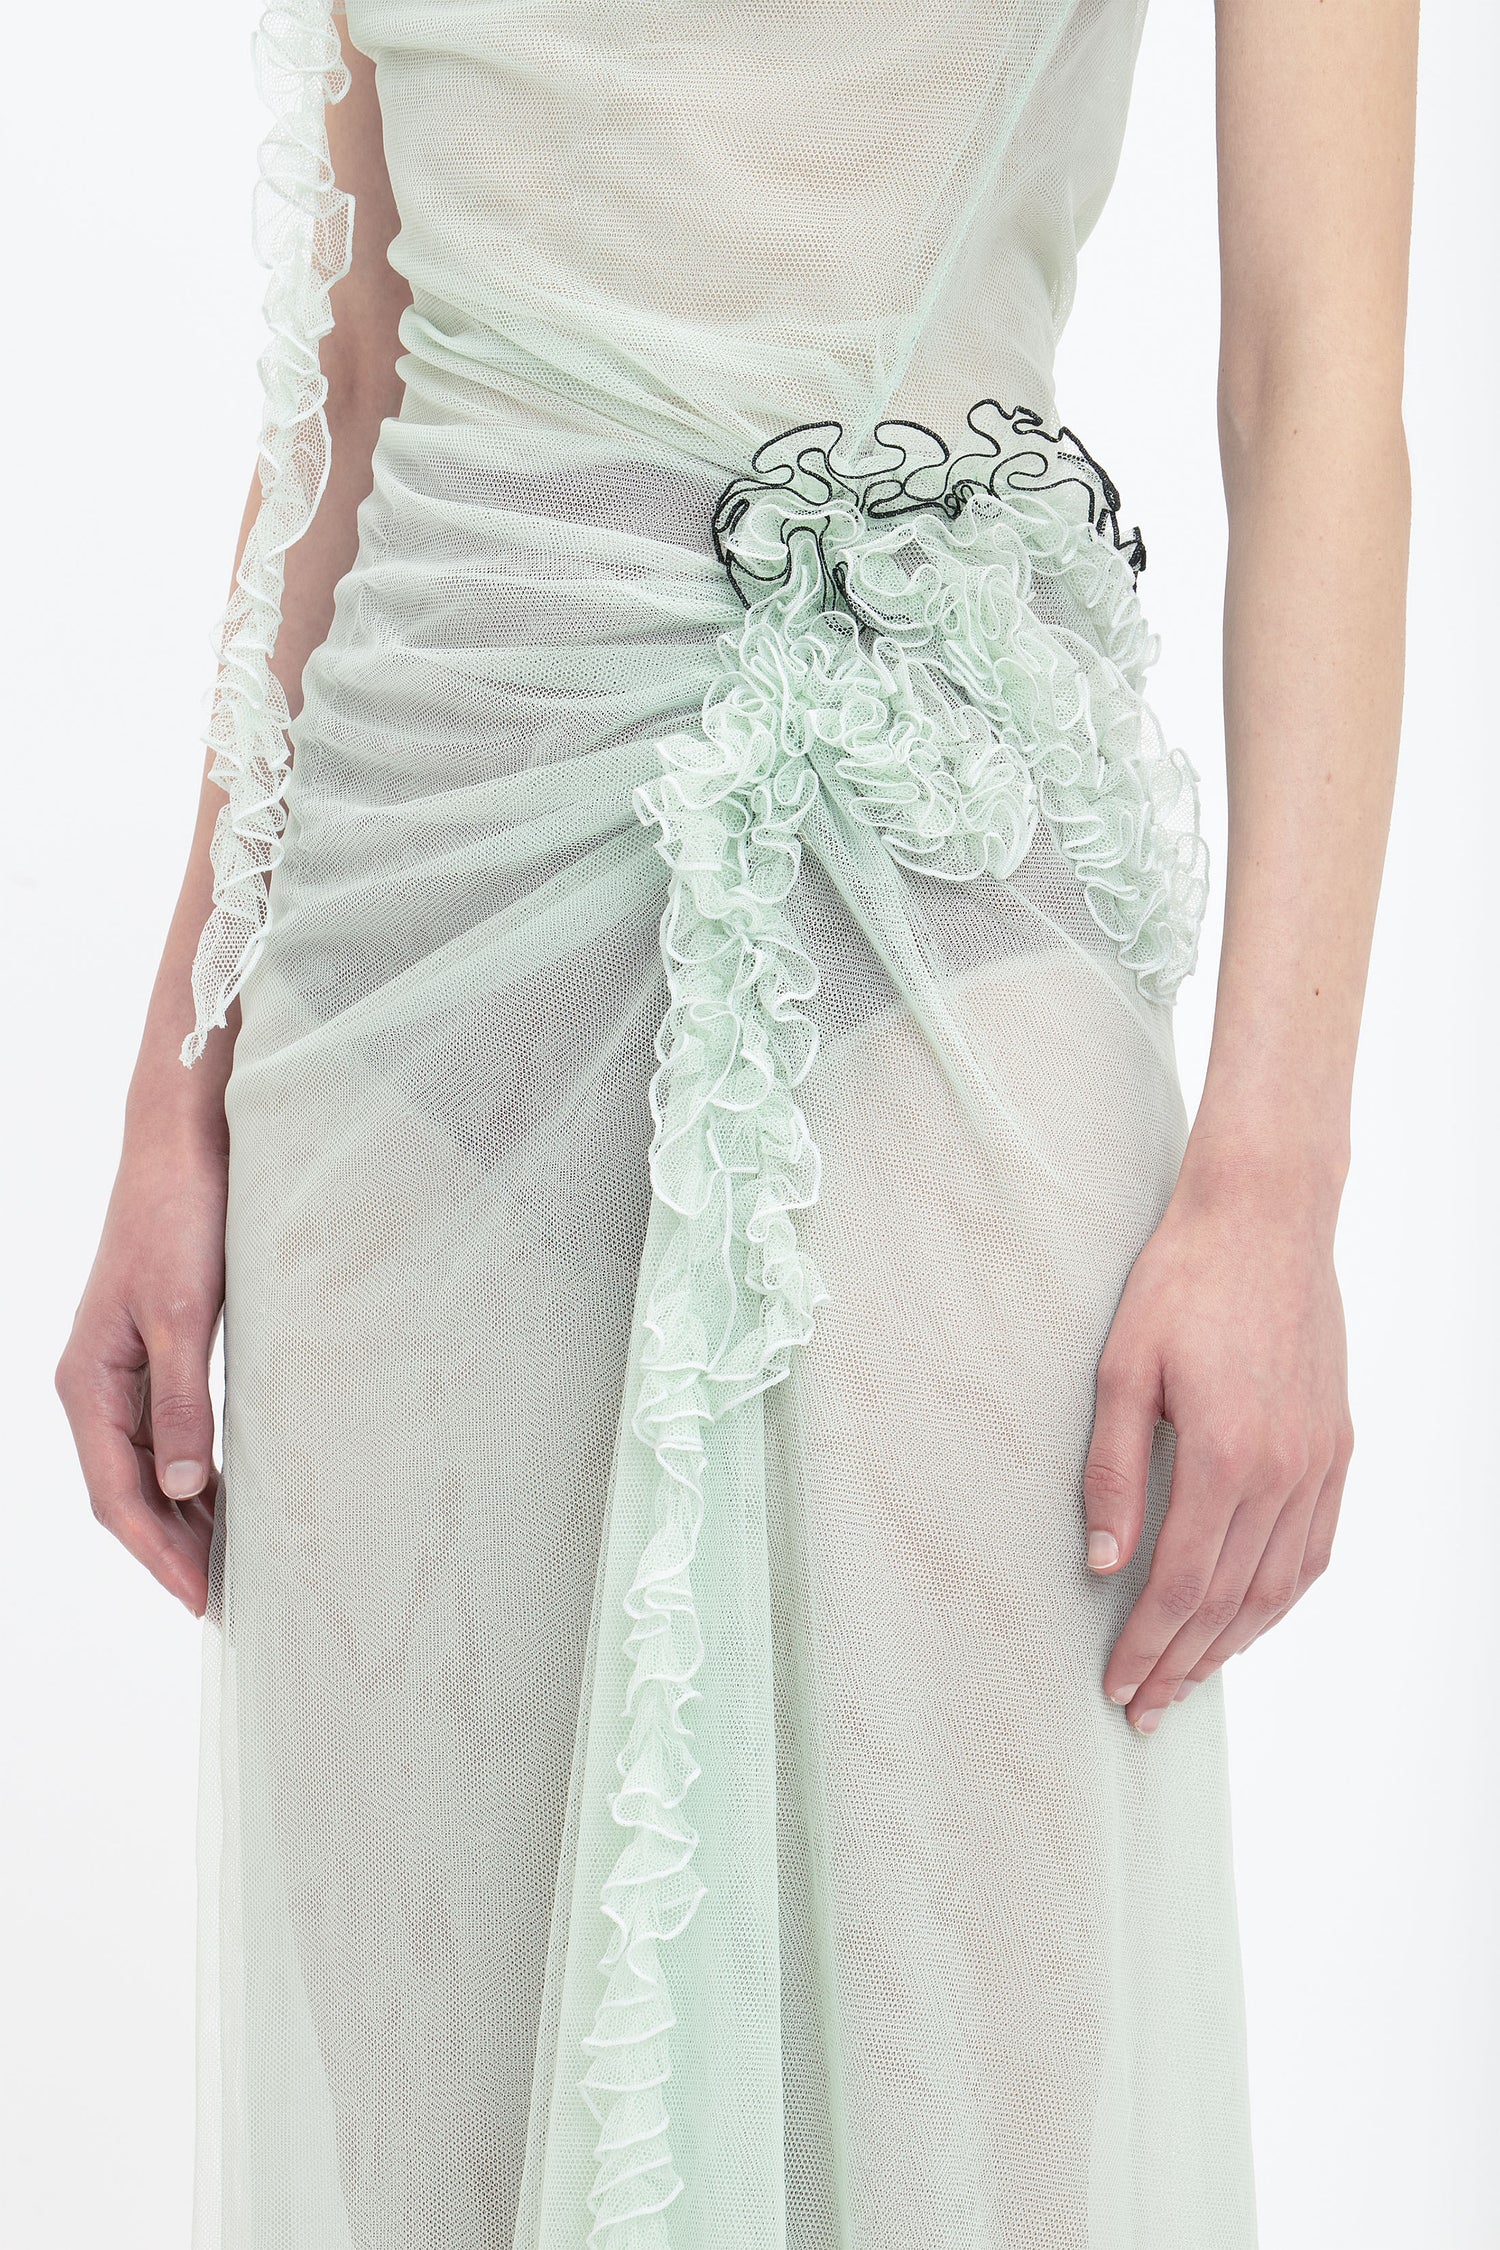 Close-up of a person wearing the Victoria Beckham Gathered Tulle Detail Floor-Length Dress In Jade with intricate floral ruche detailing and a decorative black element at the waist.